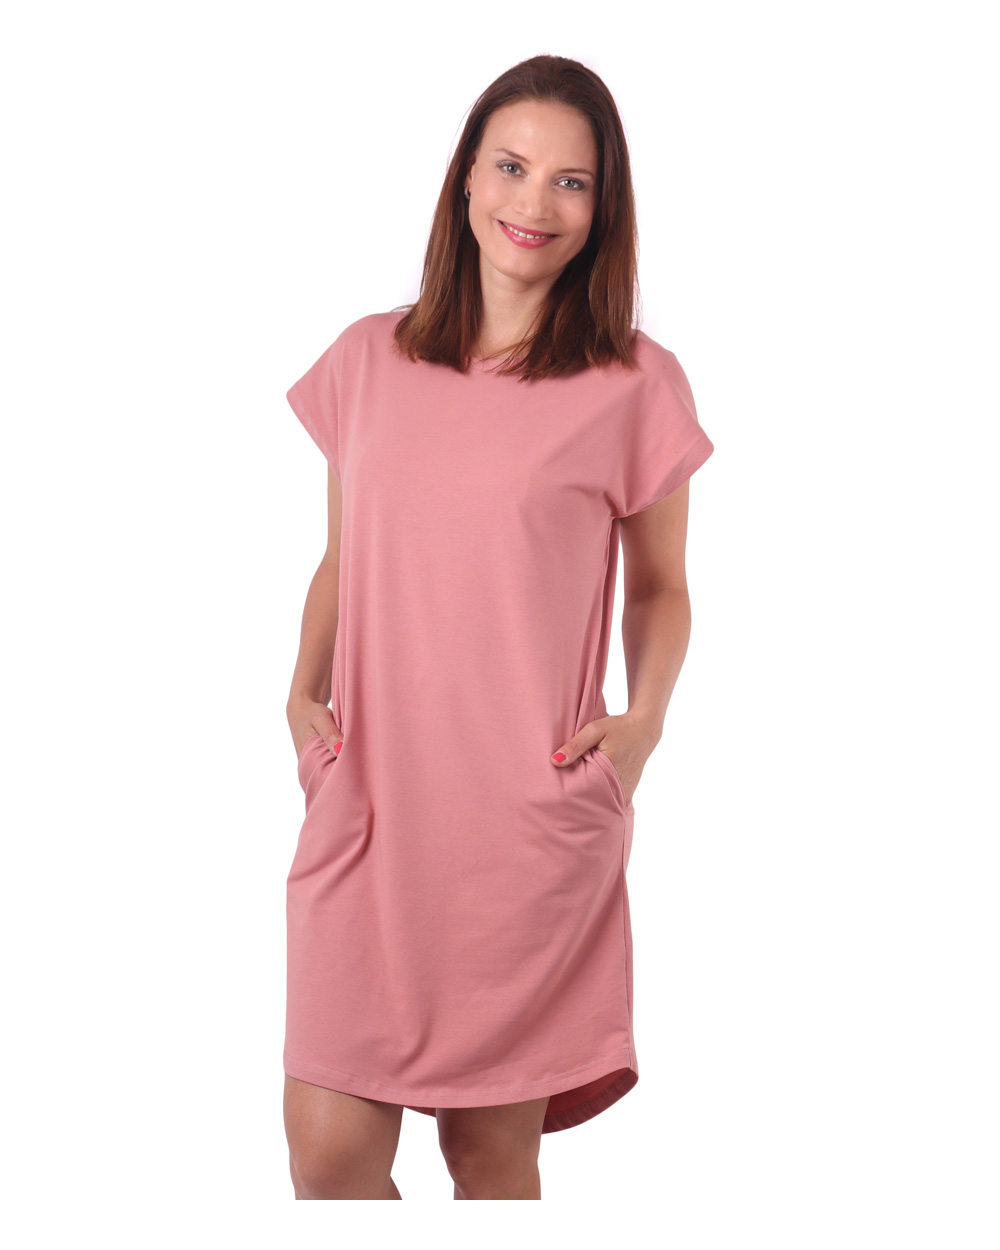 Women's dress with pockets Zoe, oversized loose fit, old rose